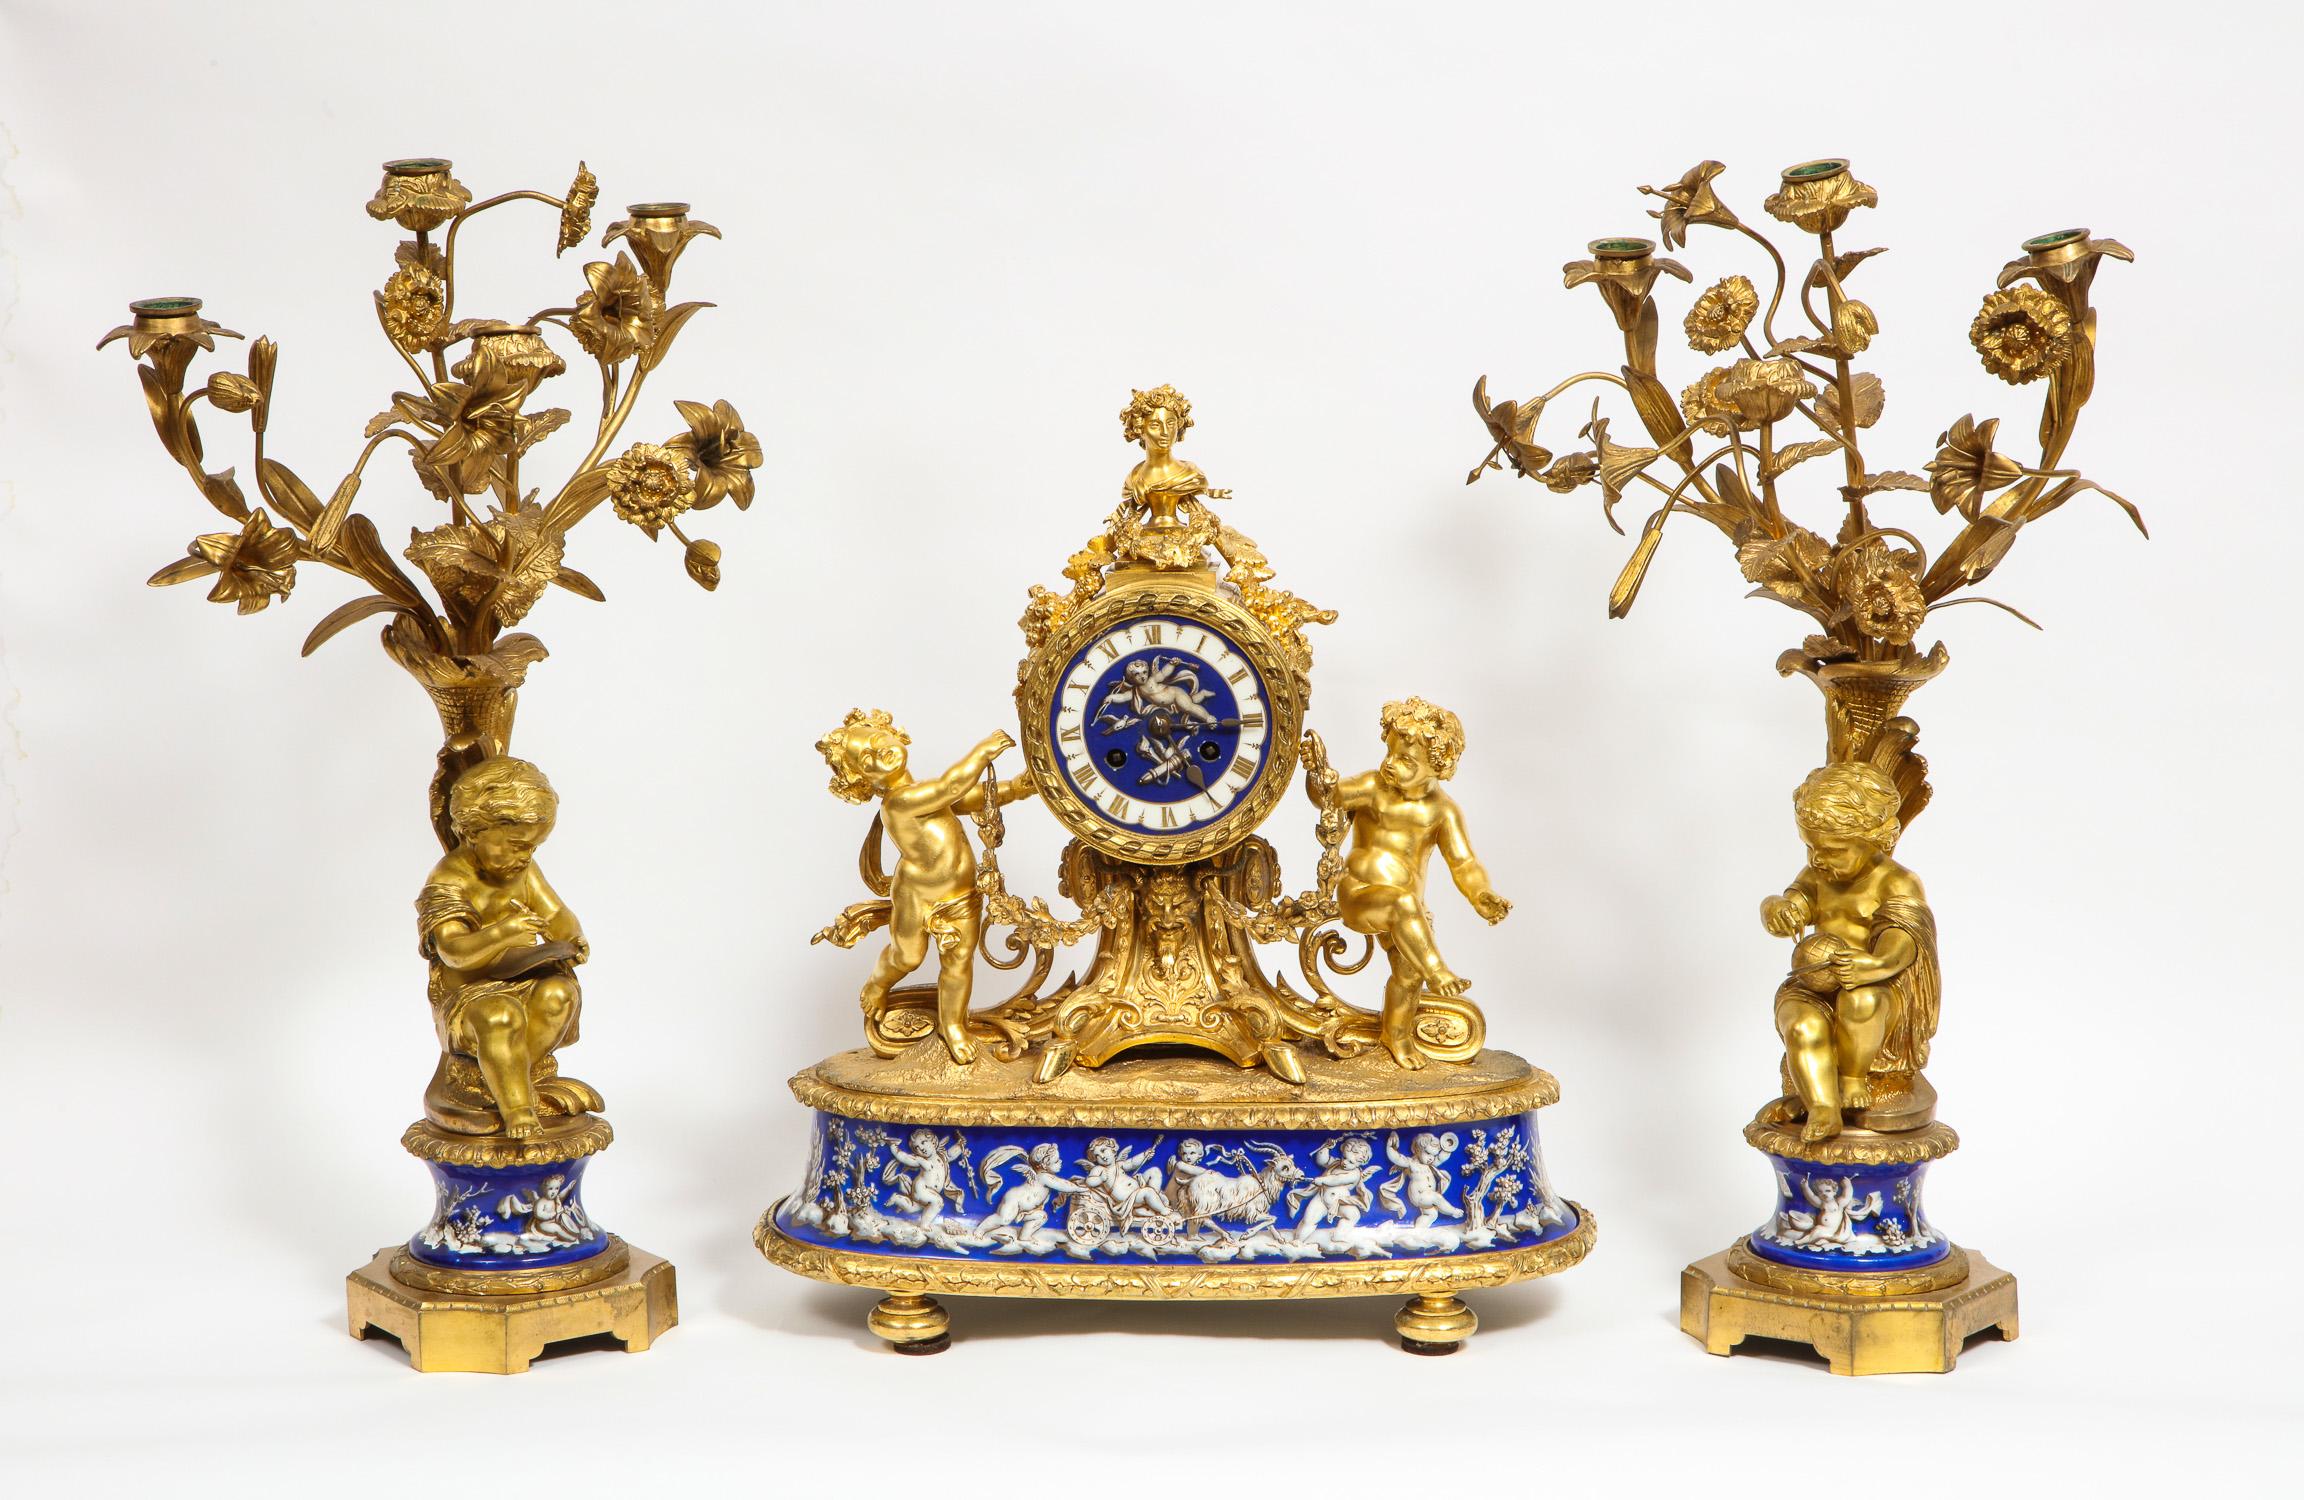 Exquisite French ormolu bronze and blue porcelain mounted three-piece clock garniture set, circa 1880.

Comprising of a clock and pair of candelabra.

The clock's porcelain dial decorated with cupids flanked by spirited putto with floral